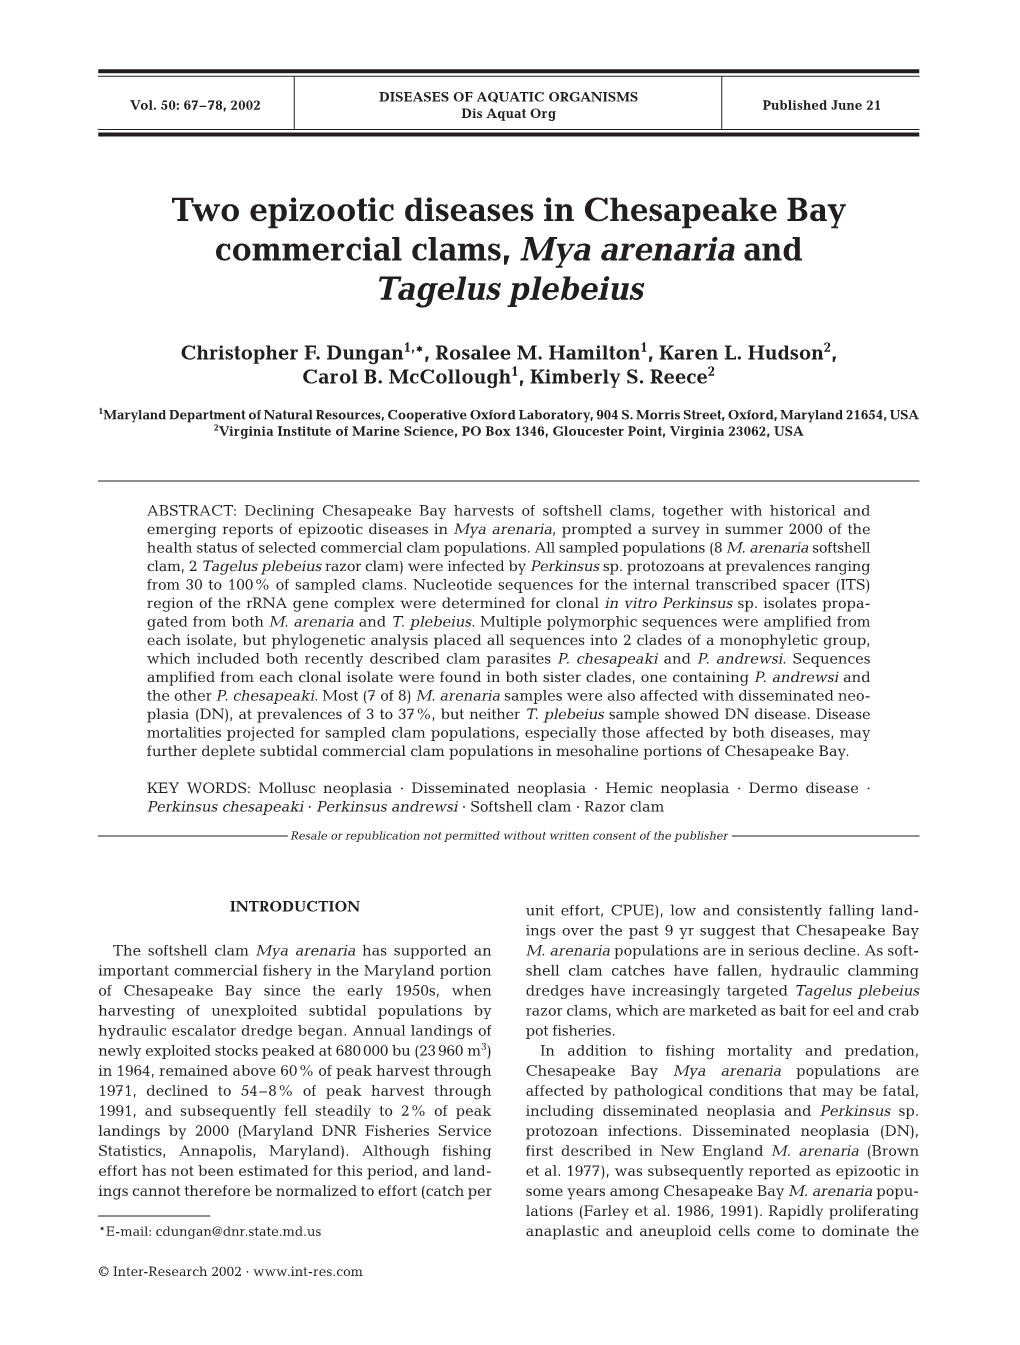 Two Epizootic Diseases in Chesapeake Bay Commercial Clams, Mya Arenaria and Tagelus Plebeius